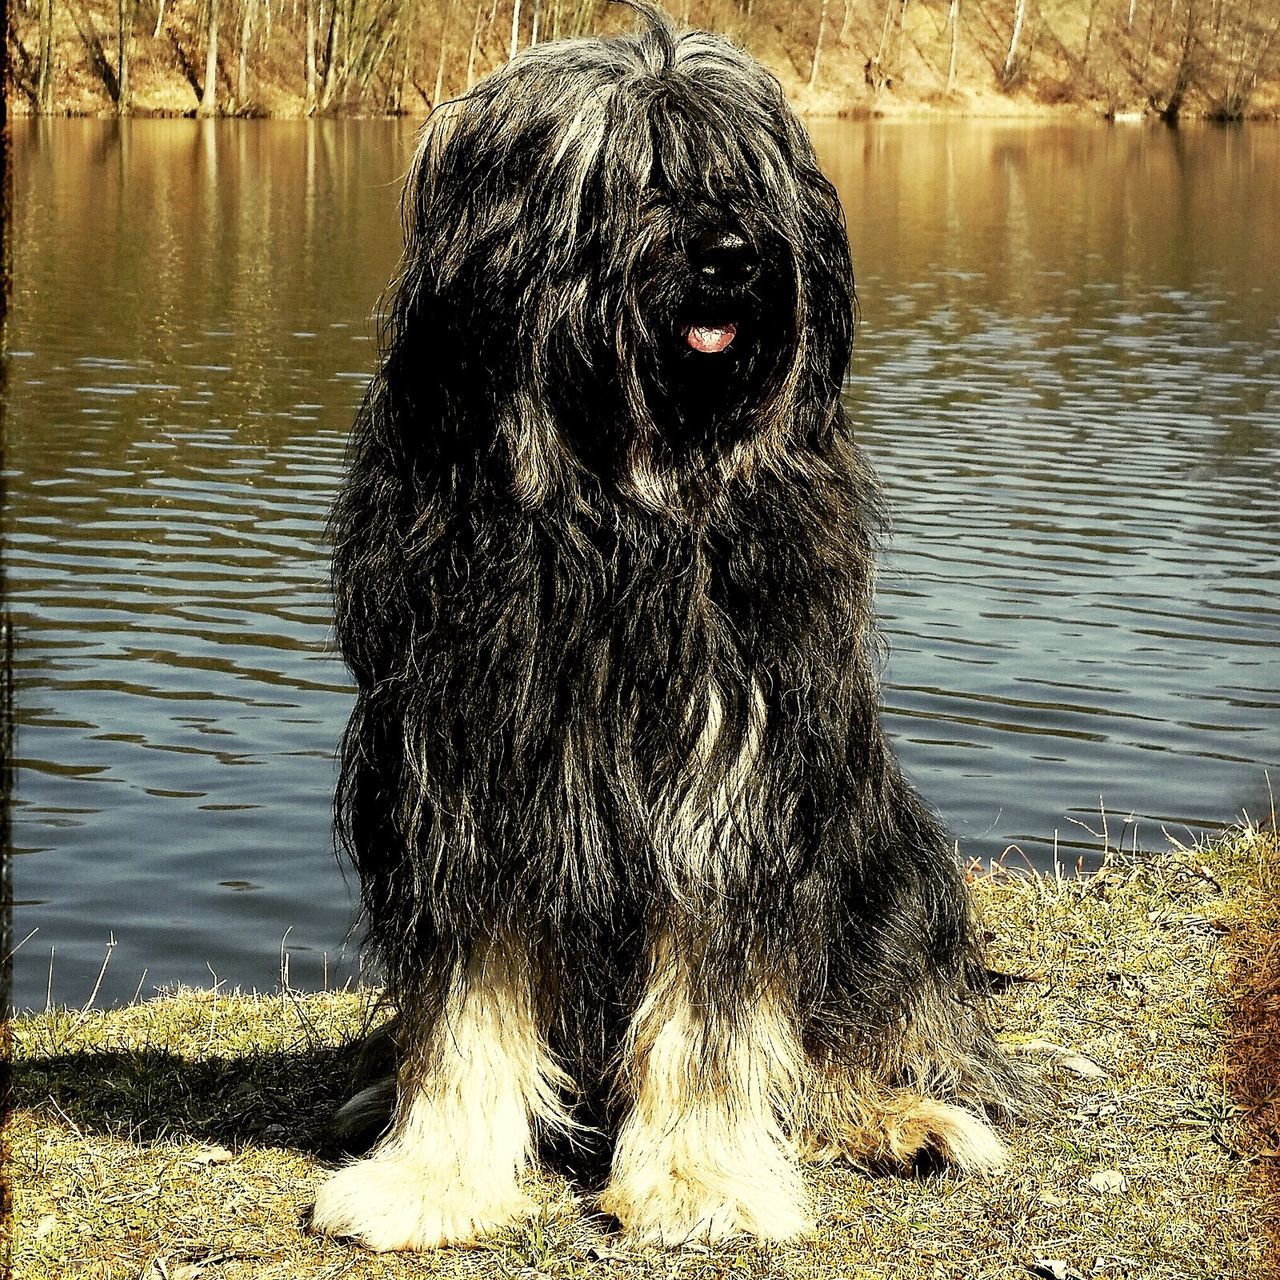 animal themes, water, one animal, dog, lake, mammal, domestic animals, pets, nature, standing, outdoors, riverbank, reflection, black color, animals in the wild, day, lakeshore, wildlife, no people, river